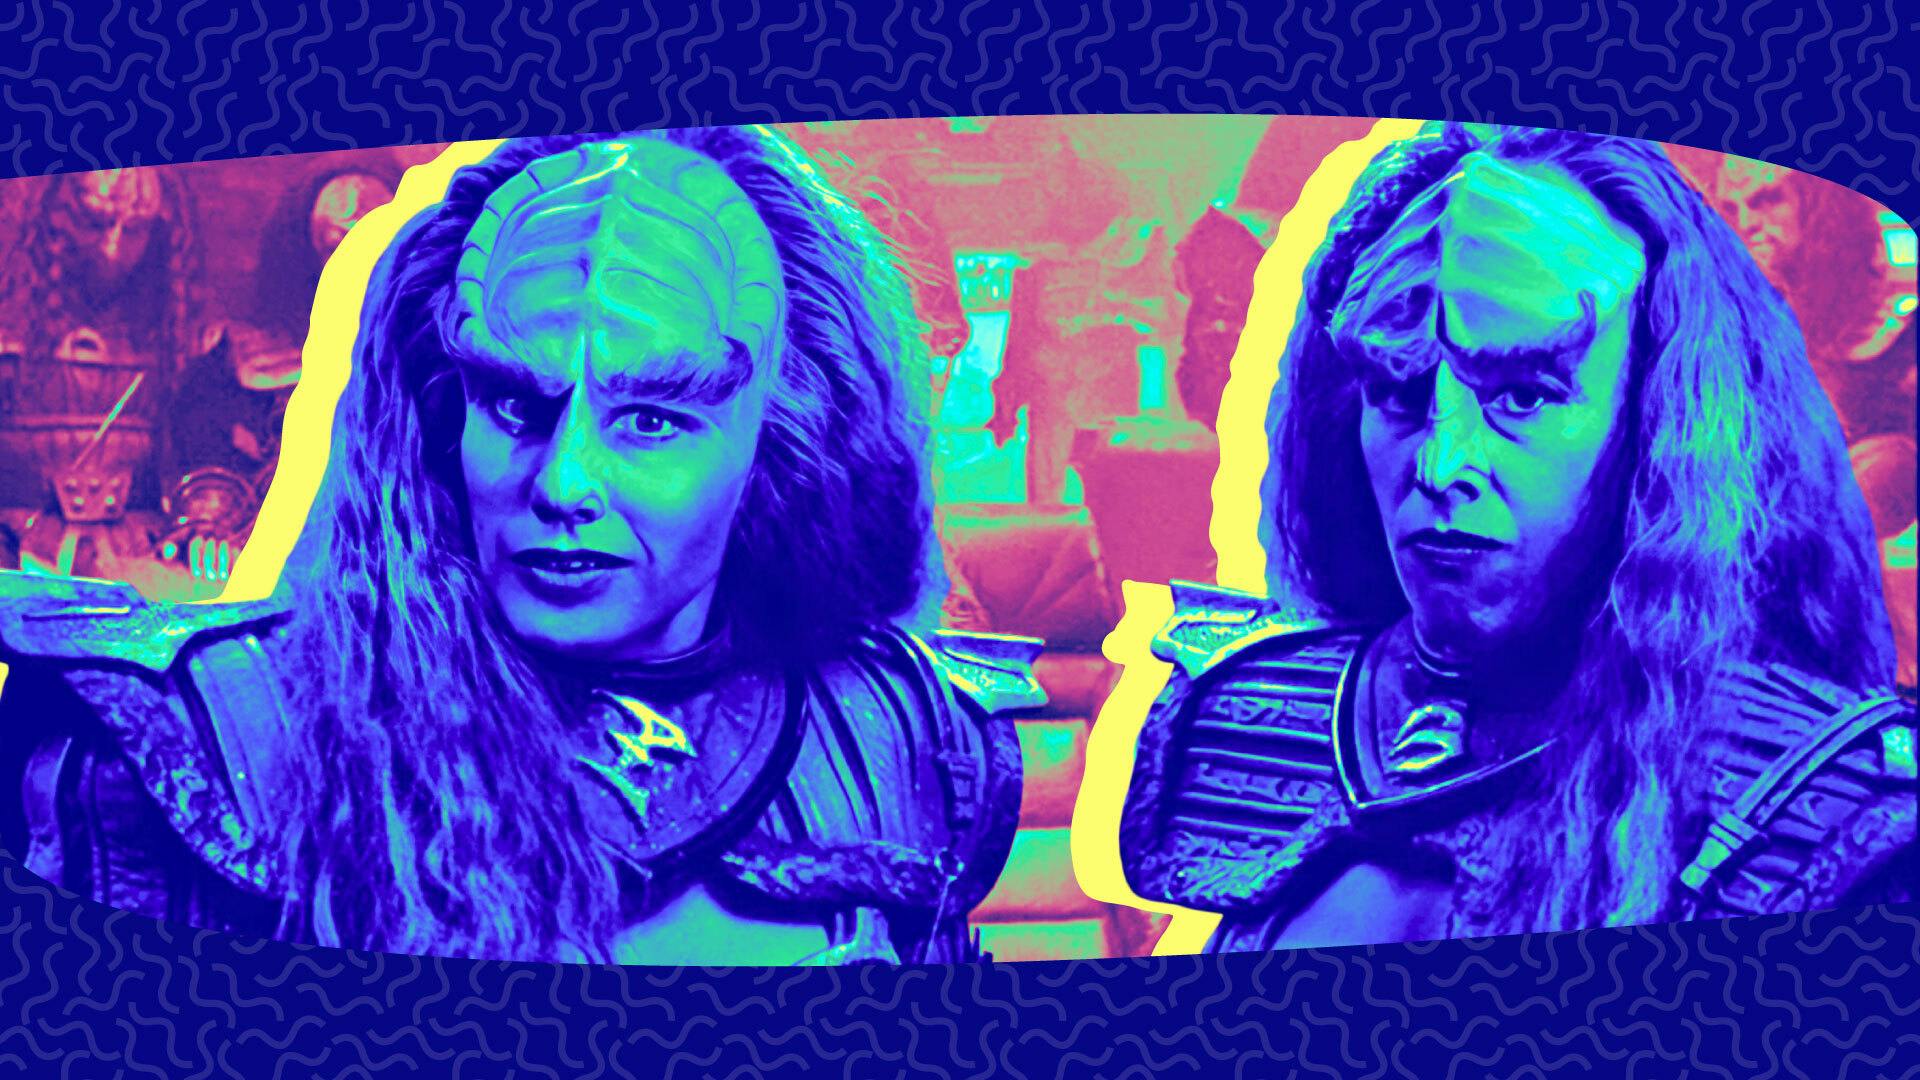 Illustrated banner featuring the Duras sisters, Lursa and B'Etor